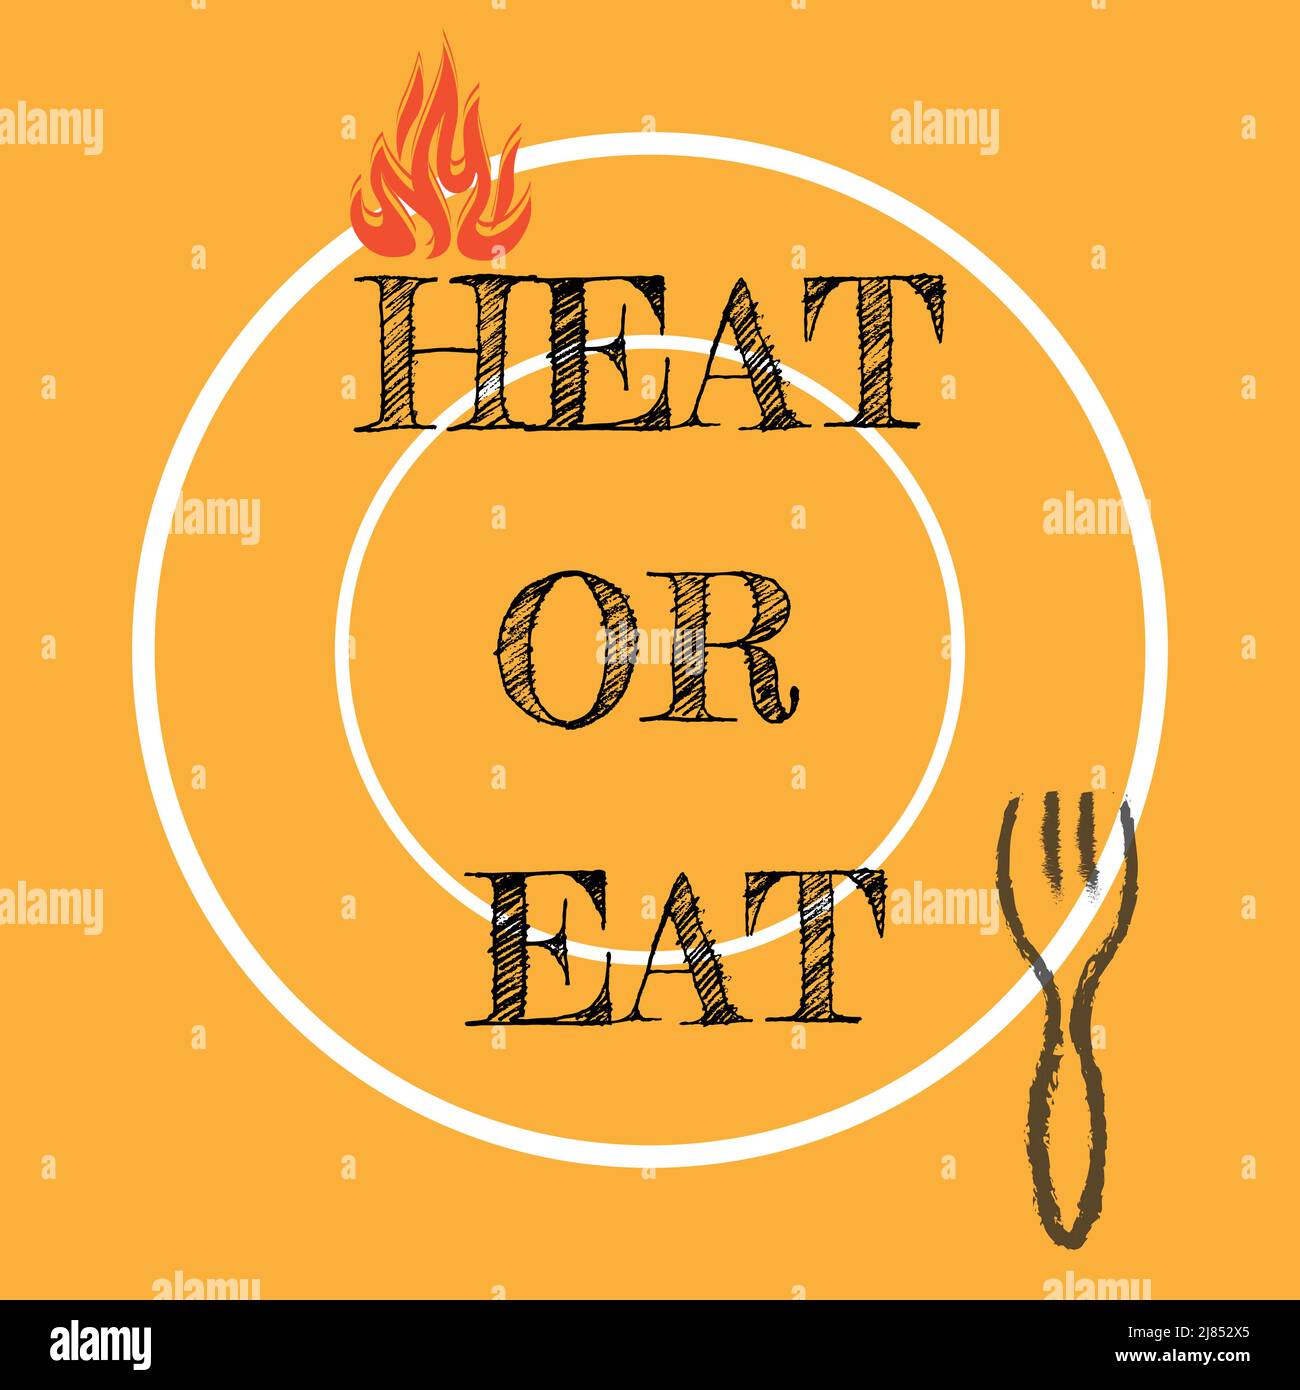 Heat Or Eat fuel poverty and emergency food aid consept vector illustration Stock Vector